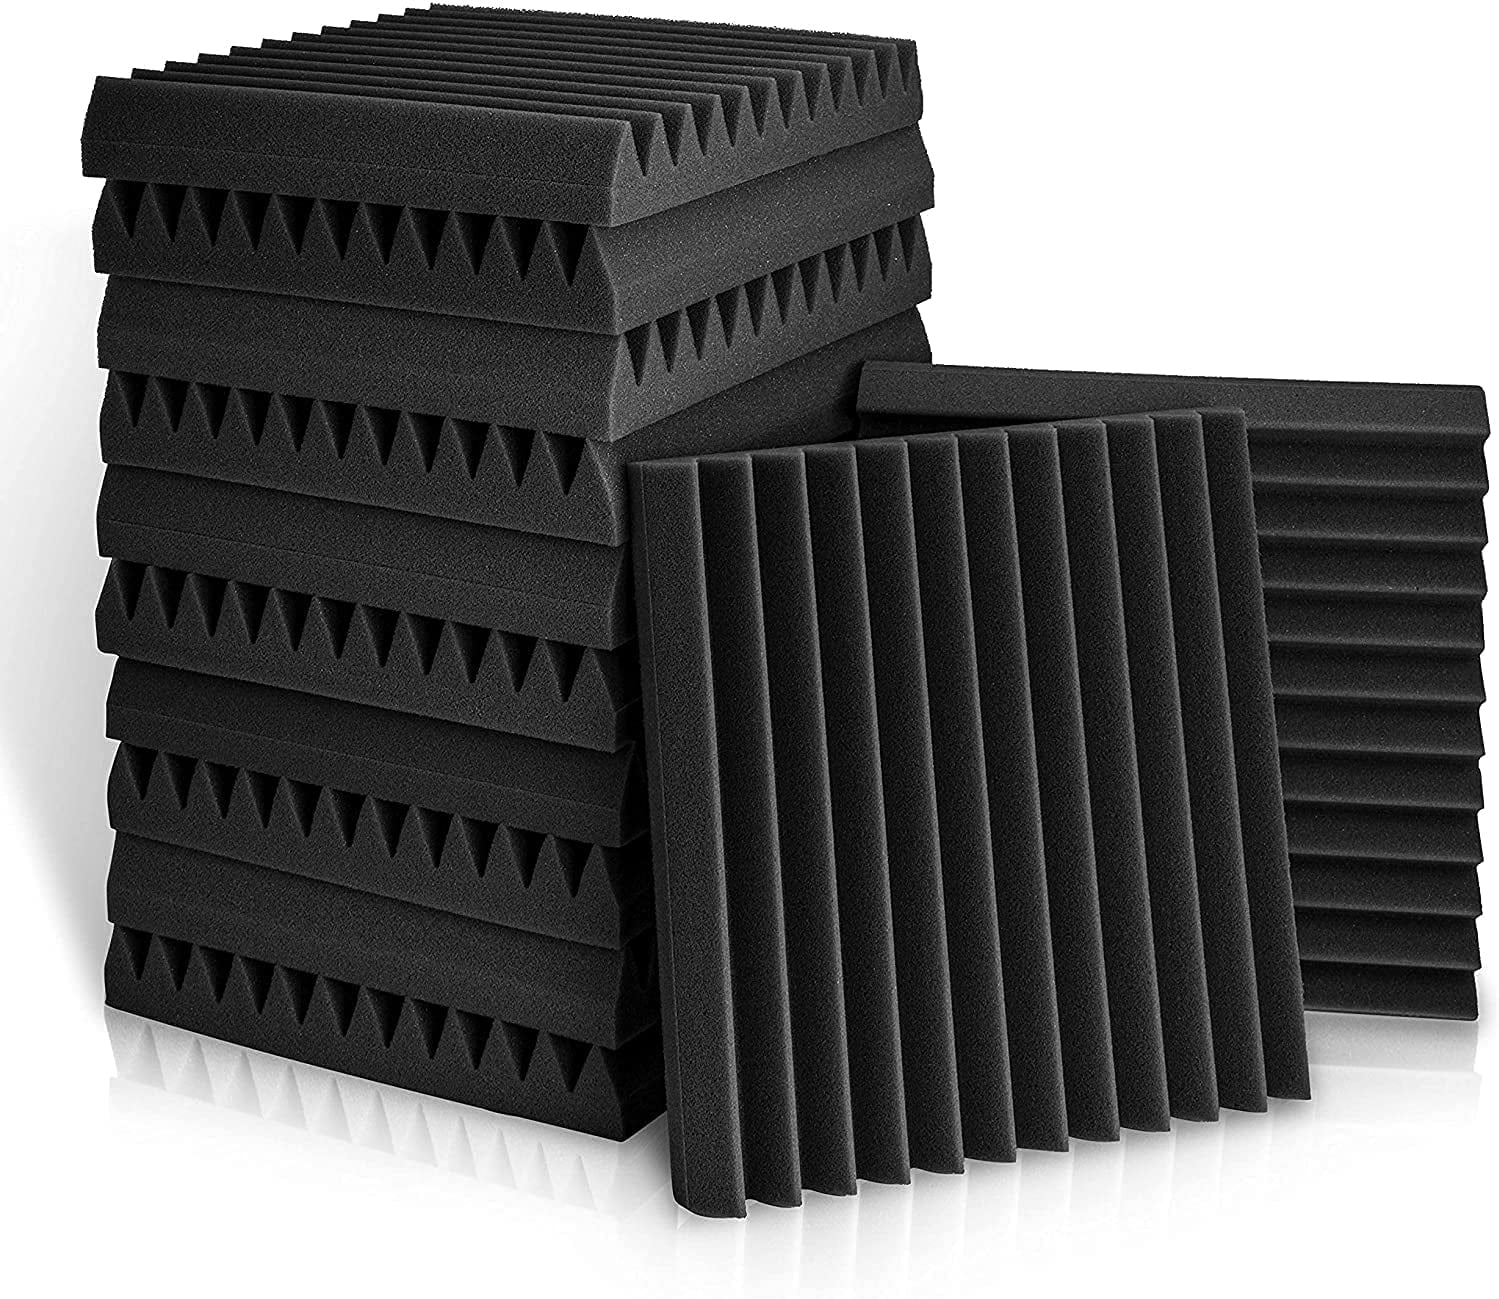 Periodic Groove Structure 24 Square Feet Black Acoustic Studio Absorption Foam Panel 24 Pack 2'' X 12'' X 12'' Broadband Sound Absorber-Sound Proof Padding Soundproofing Studio Foam 